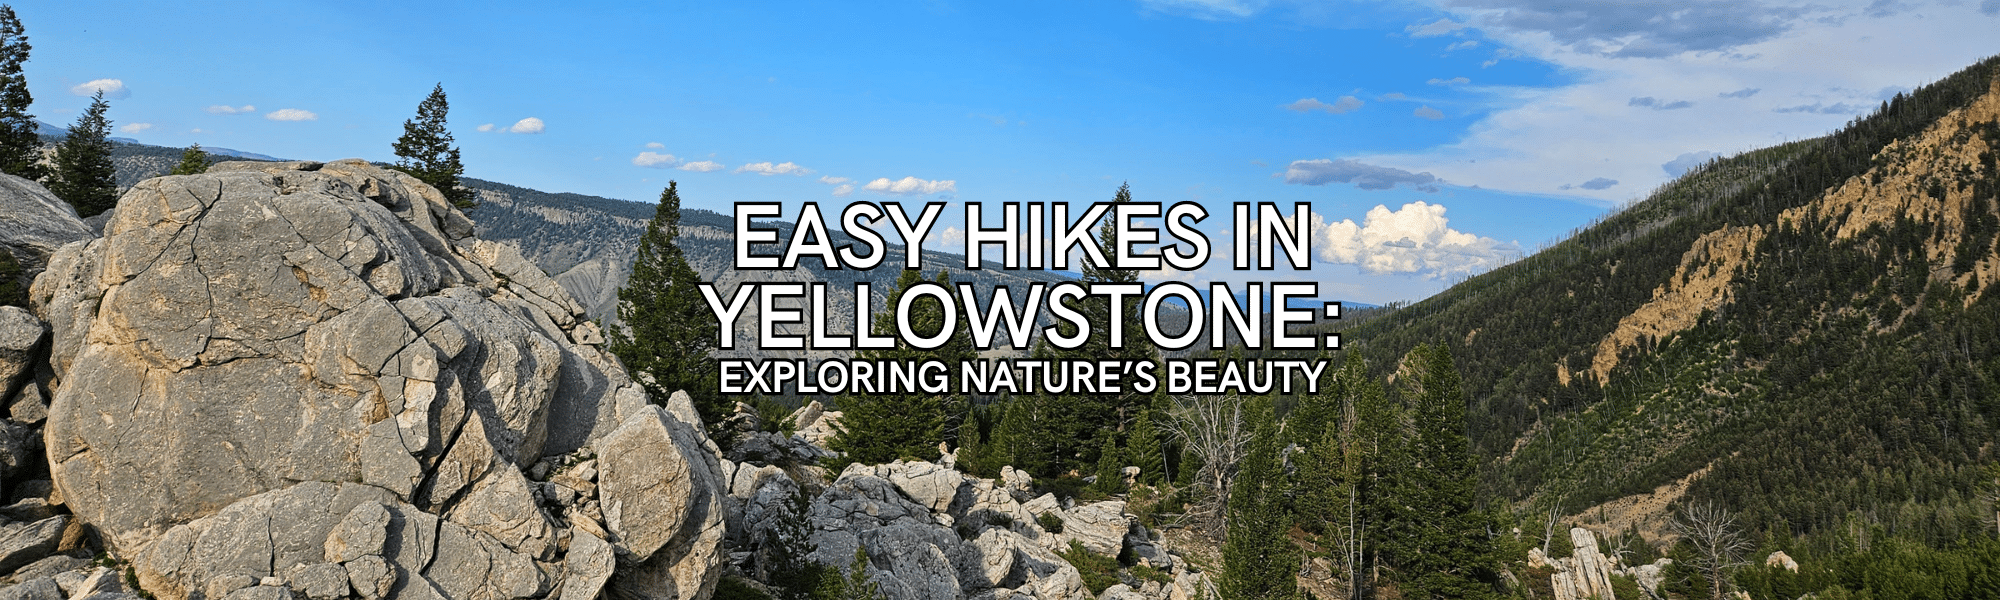 Easy Hikes in Yellowstone